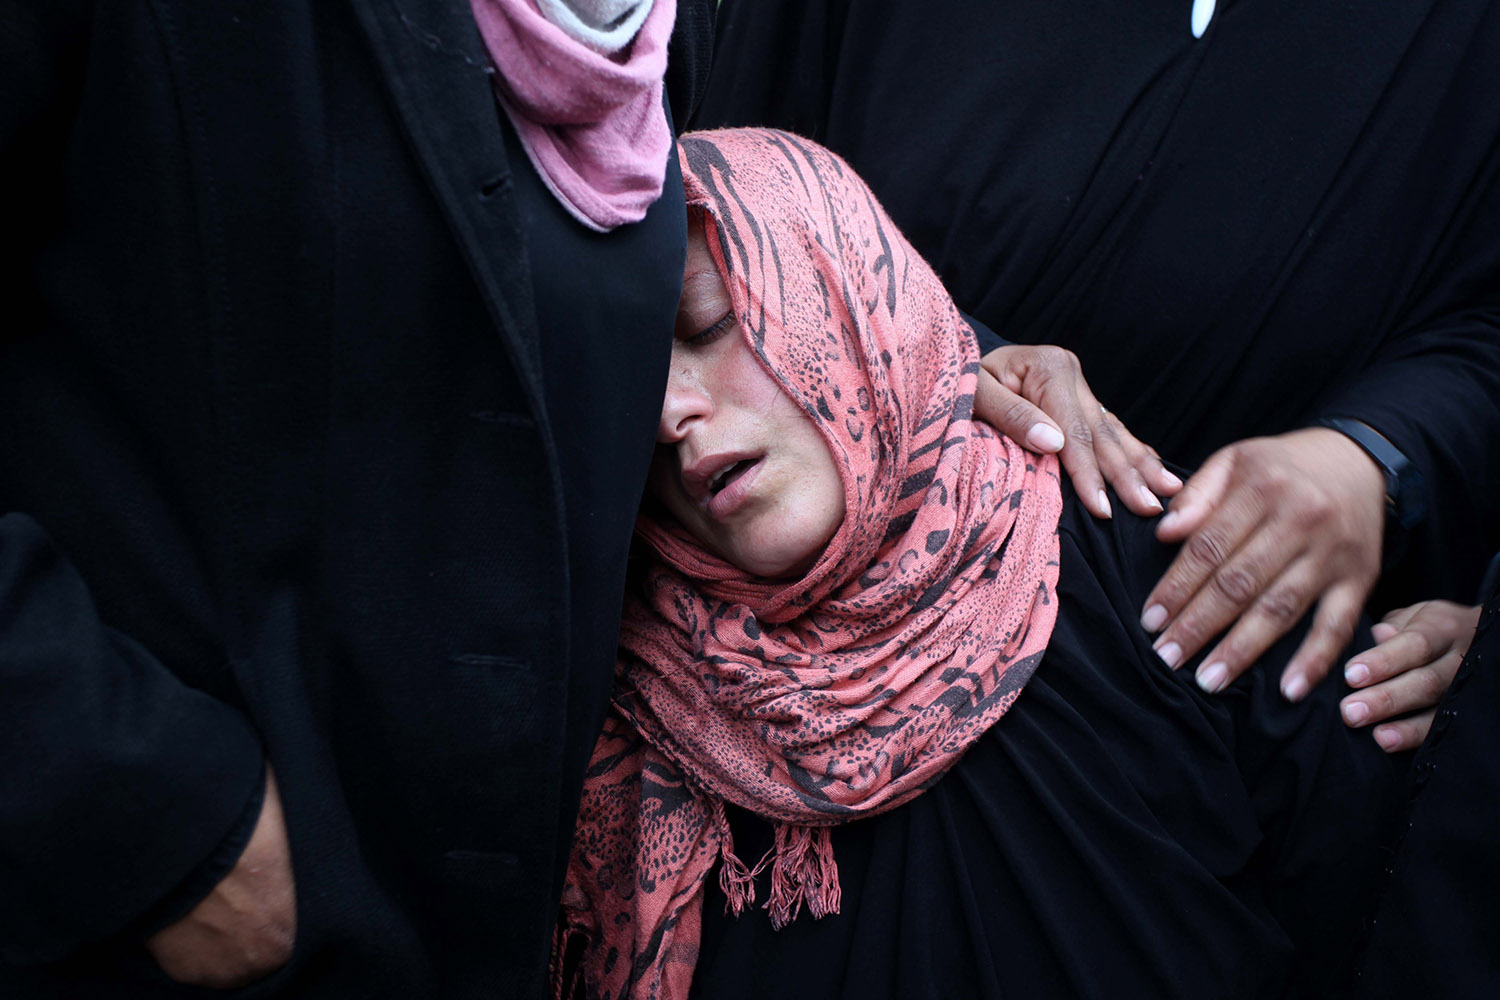 Jan. 22, 2014. Palestinian relatives of Ahmed Al-Za'anin, who was killed in an Israeli air strike, mourn during his funeral in Beit Hanoun, in the northern Gaza Strip.